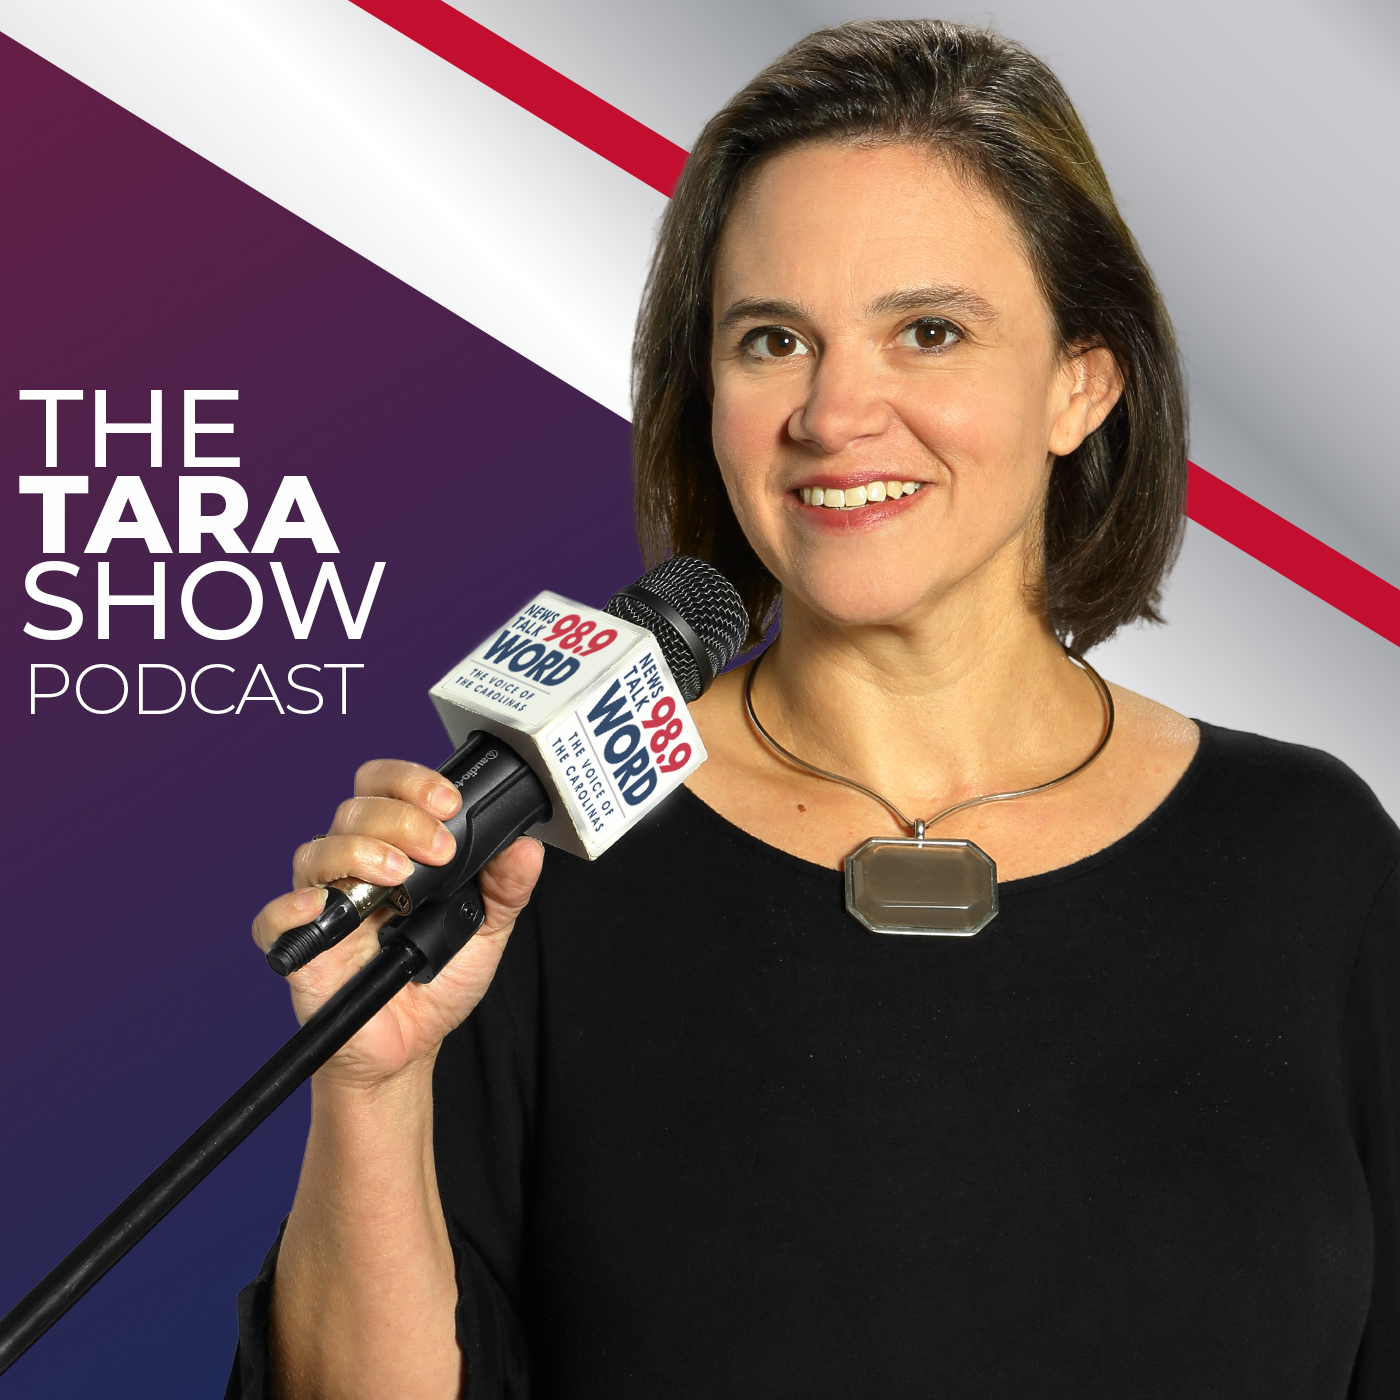 Hour 3: The Tara Show - “The SAVE Act” “Investing in the Future of America” “Joes Failing Memories and Glorious Gaffs” “Rising Liberalism in Europe”